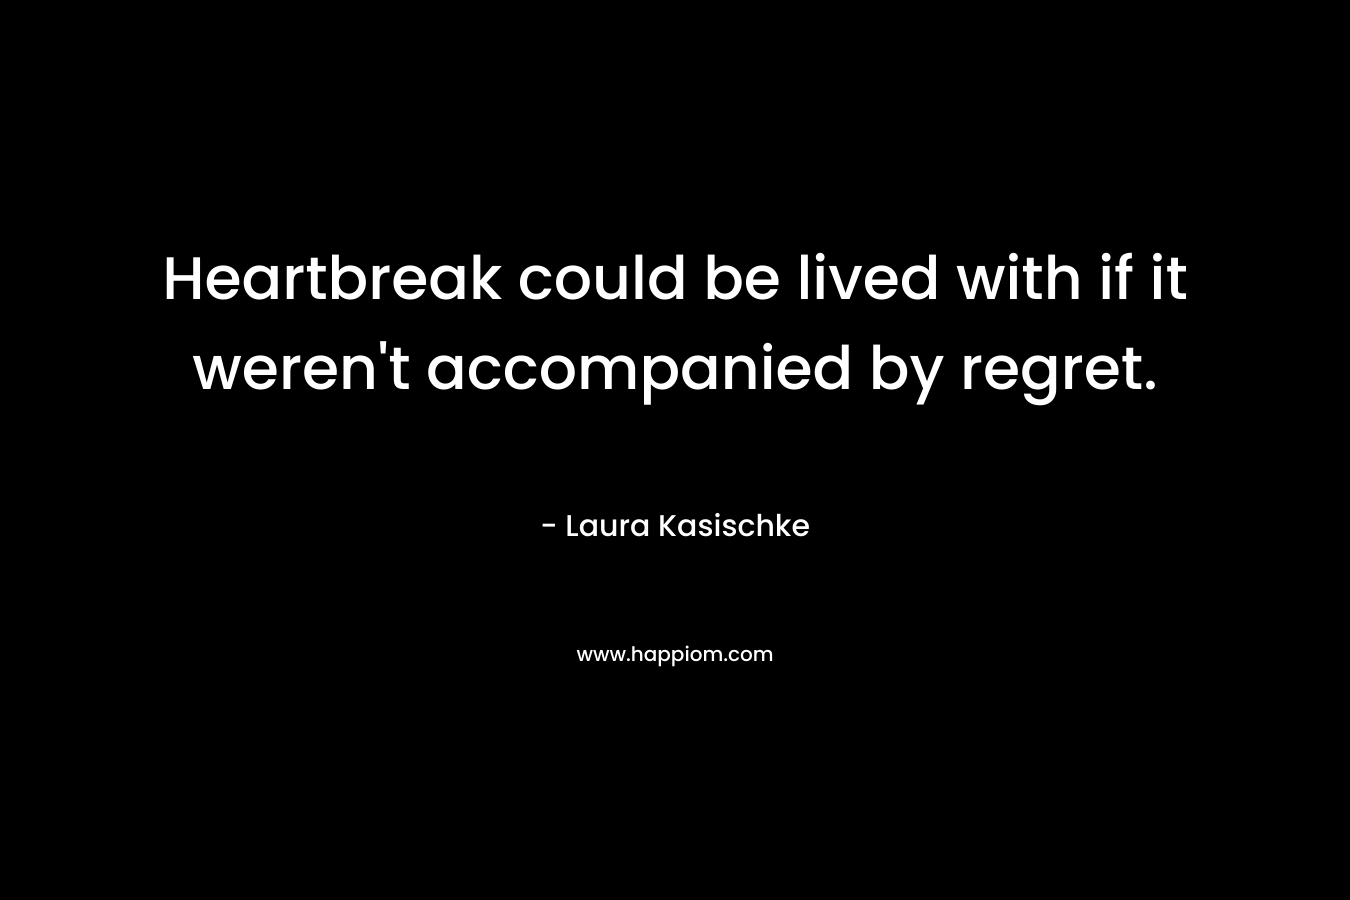 Heartbreak could be lived with if it weren’t accompanied by regret. – Laura Kasischke